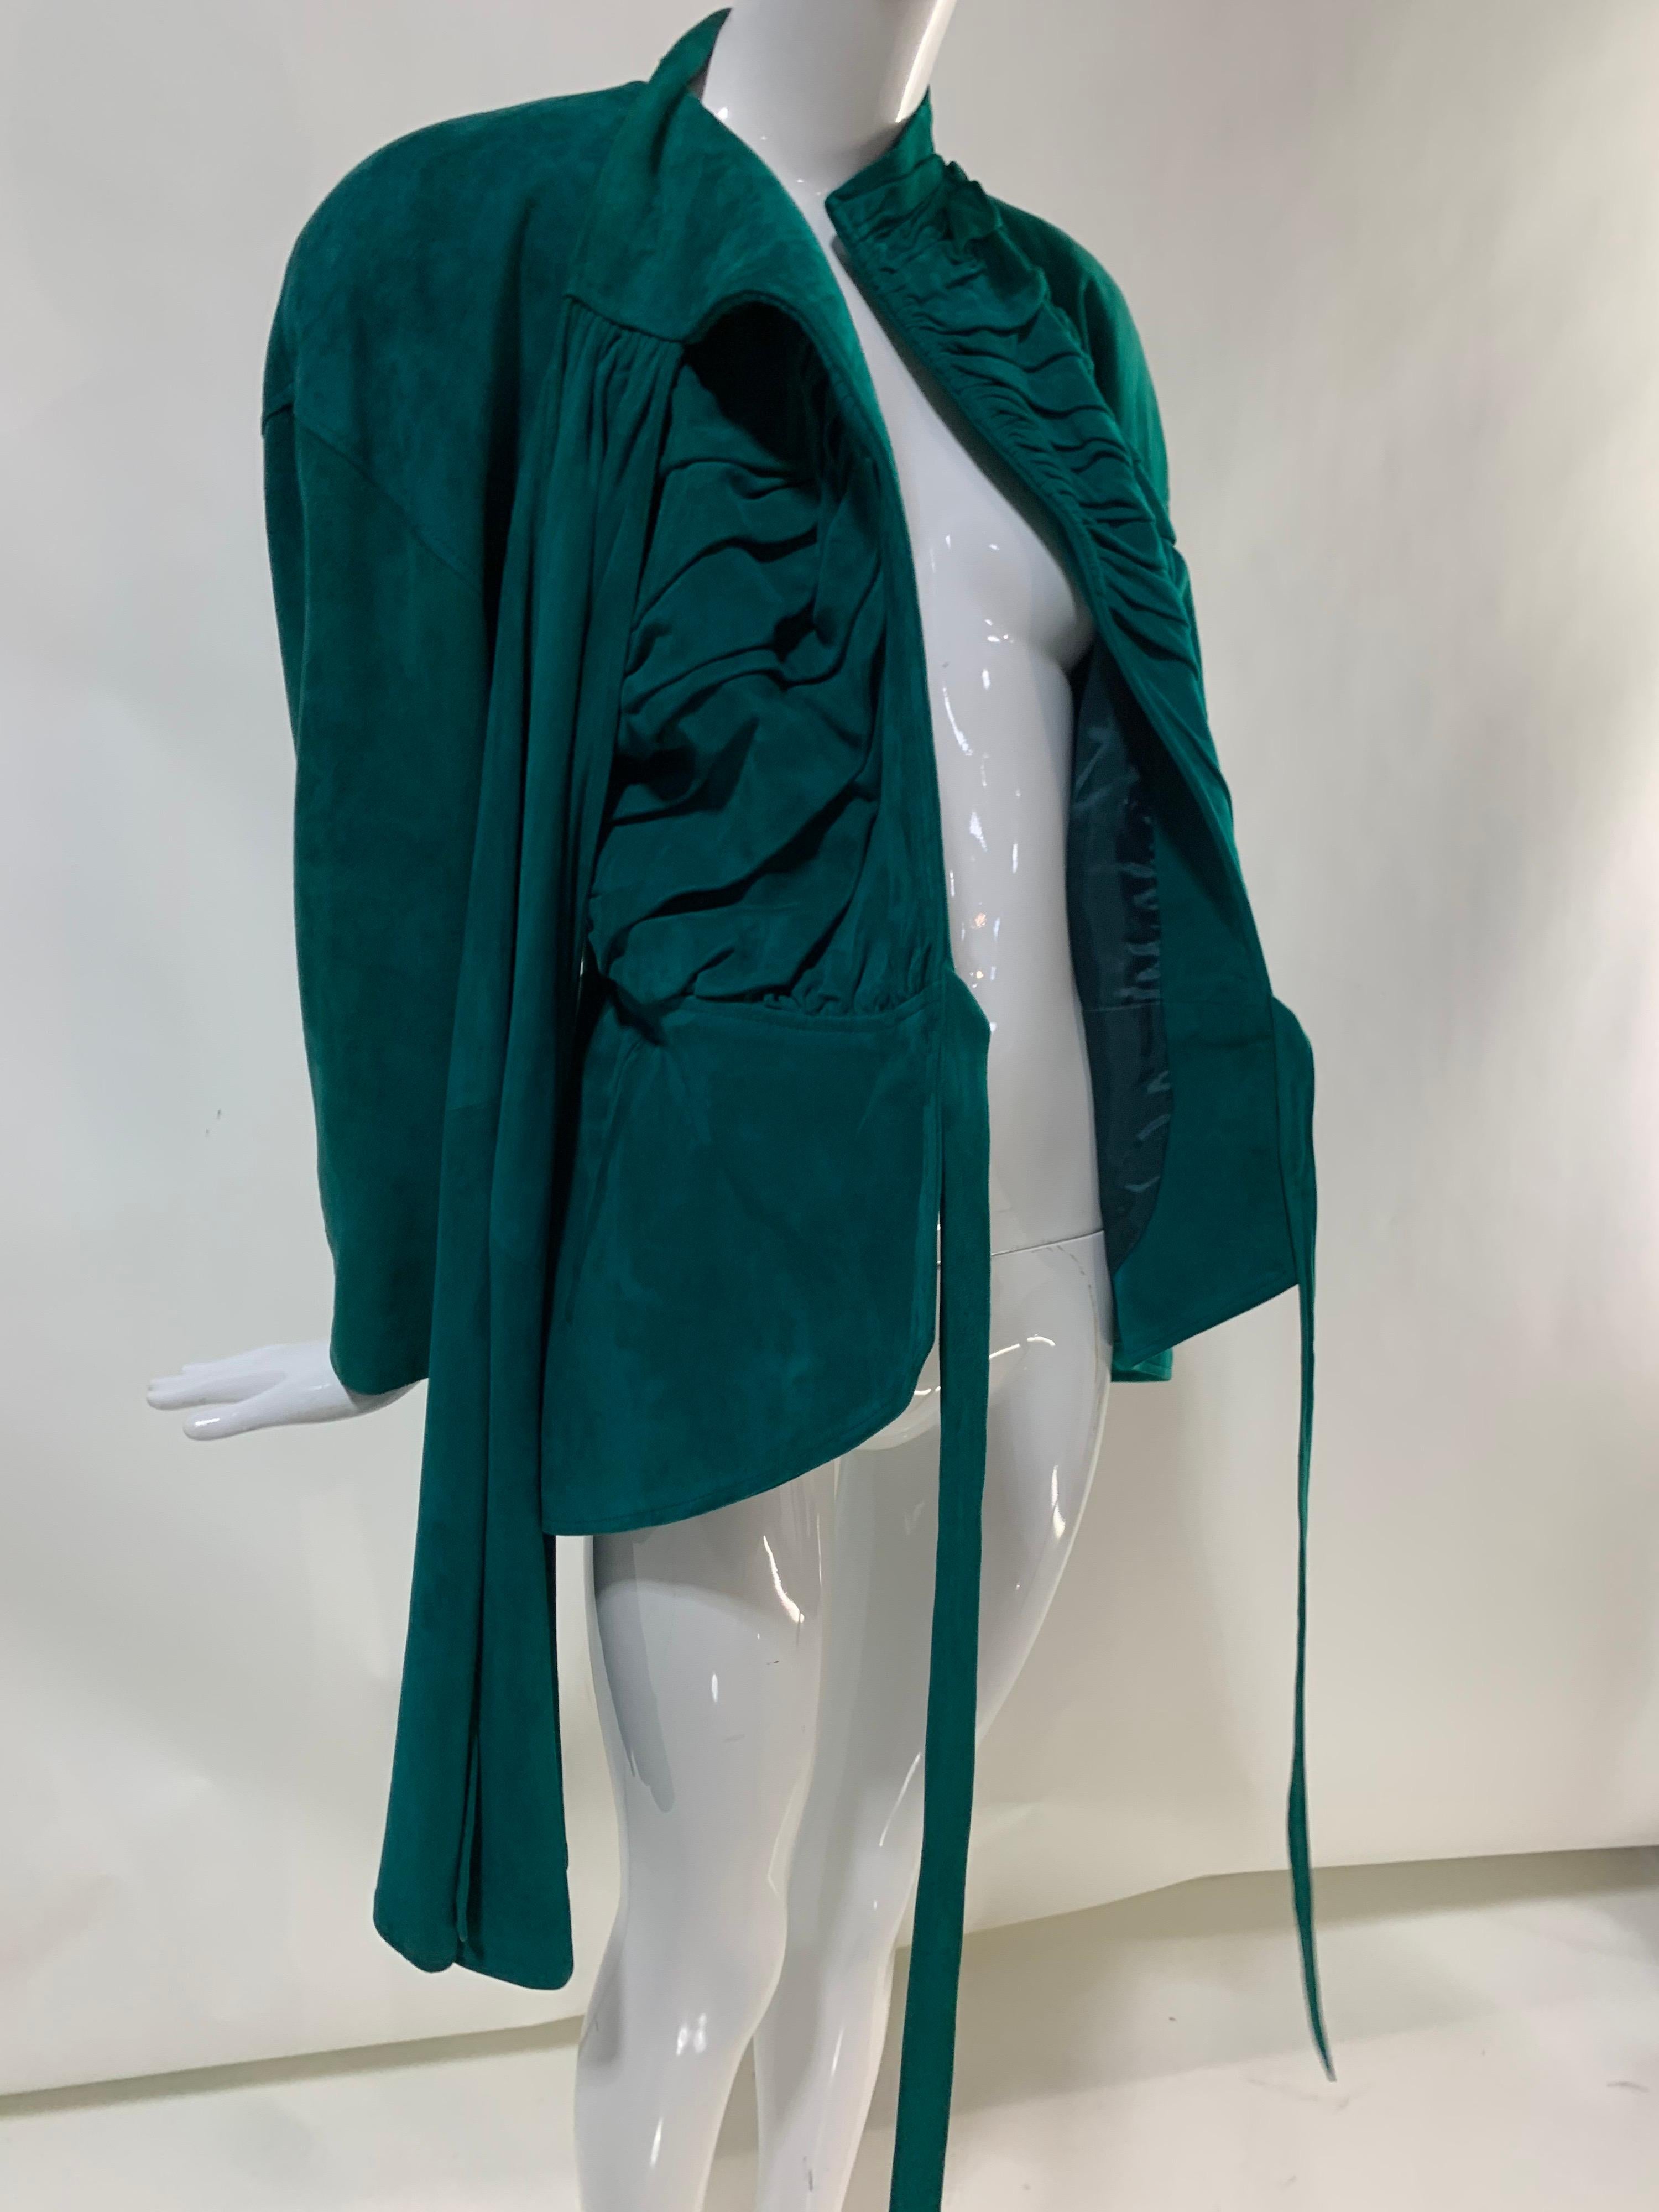 1980s Jean Claude Jitrois Emerald Suede Jacket w/ Gathered Front & Large Foulard For Sale 5